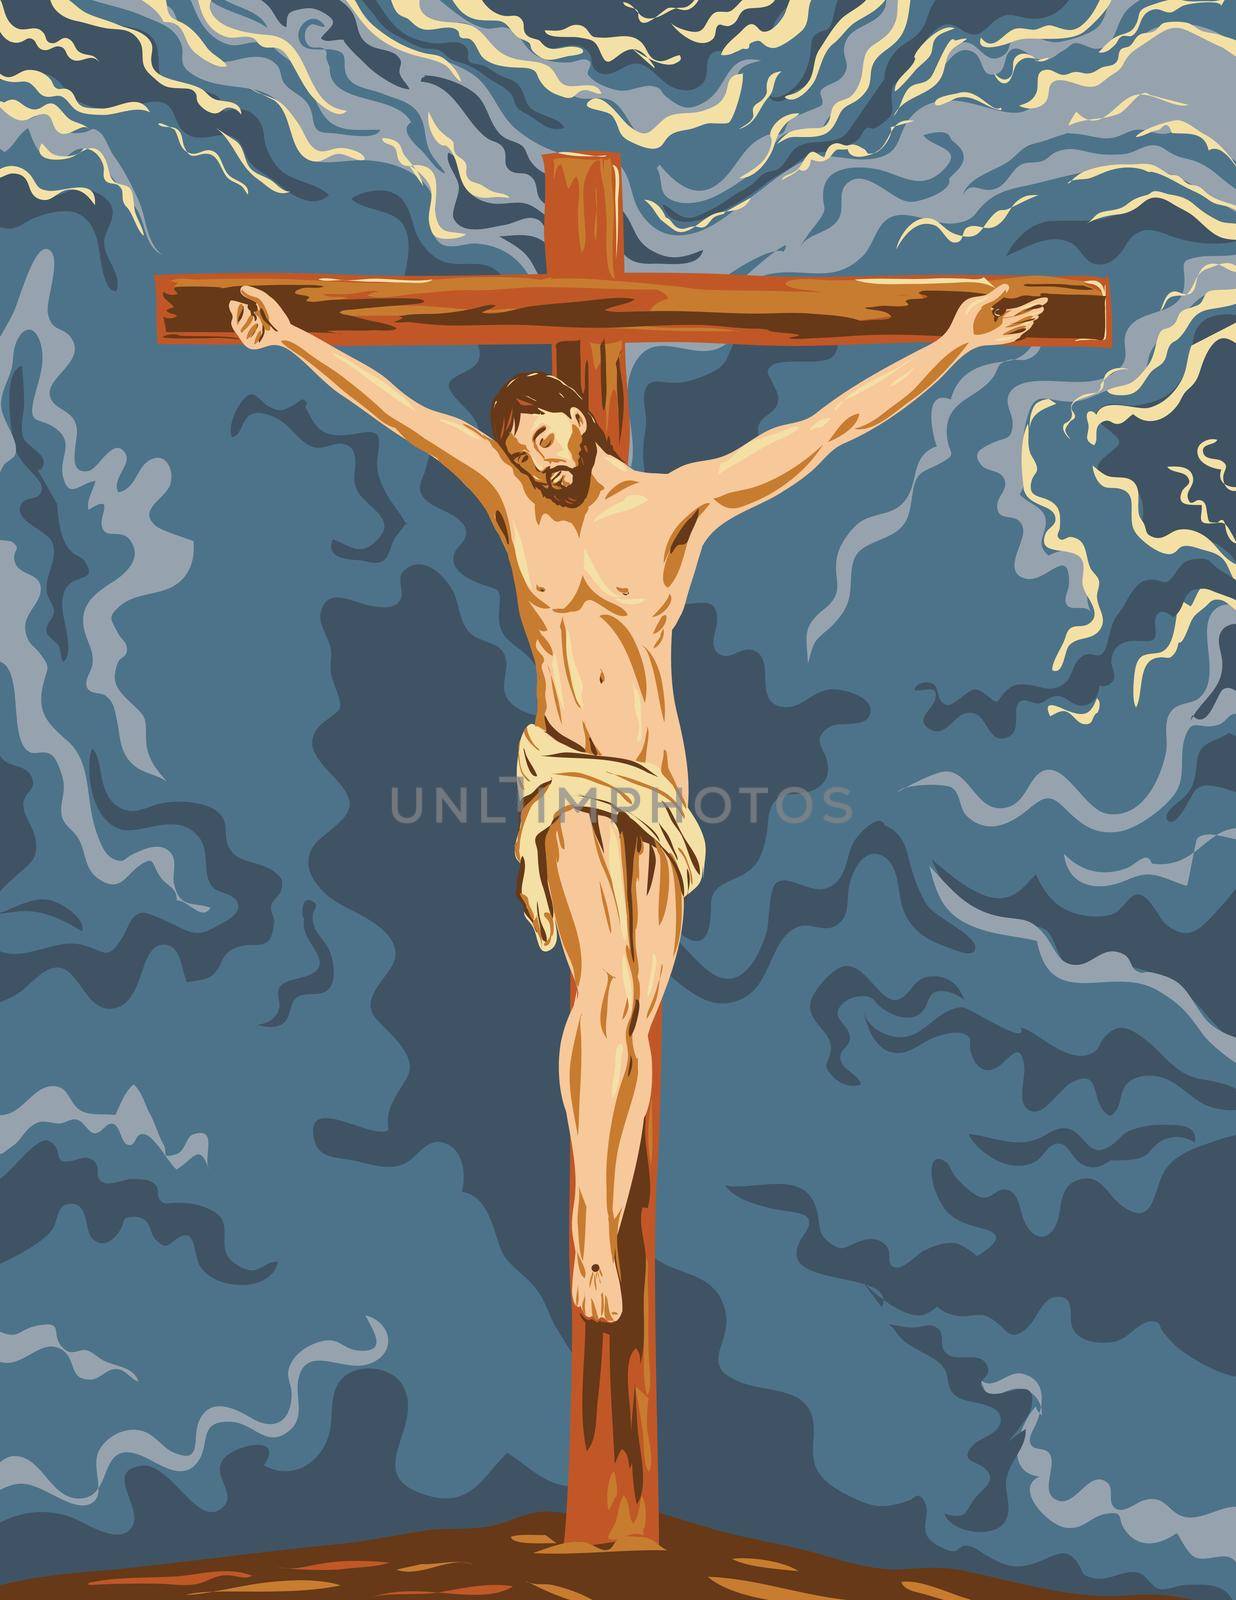 WPA poster art of the crucified Jesus Christ on the cross during his crucifixion done in works project administration or federal art project style.